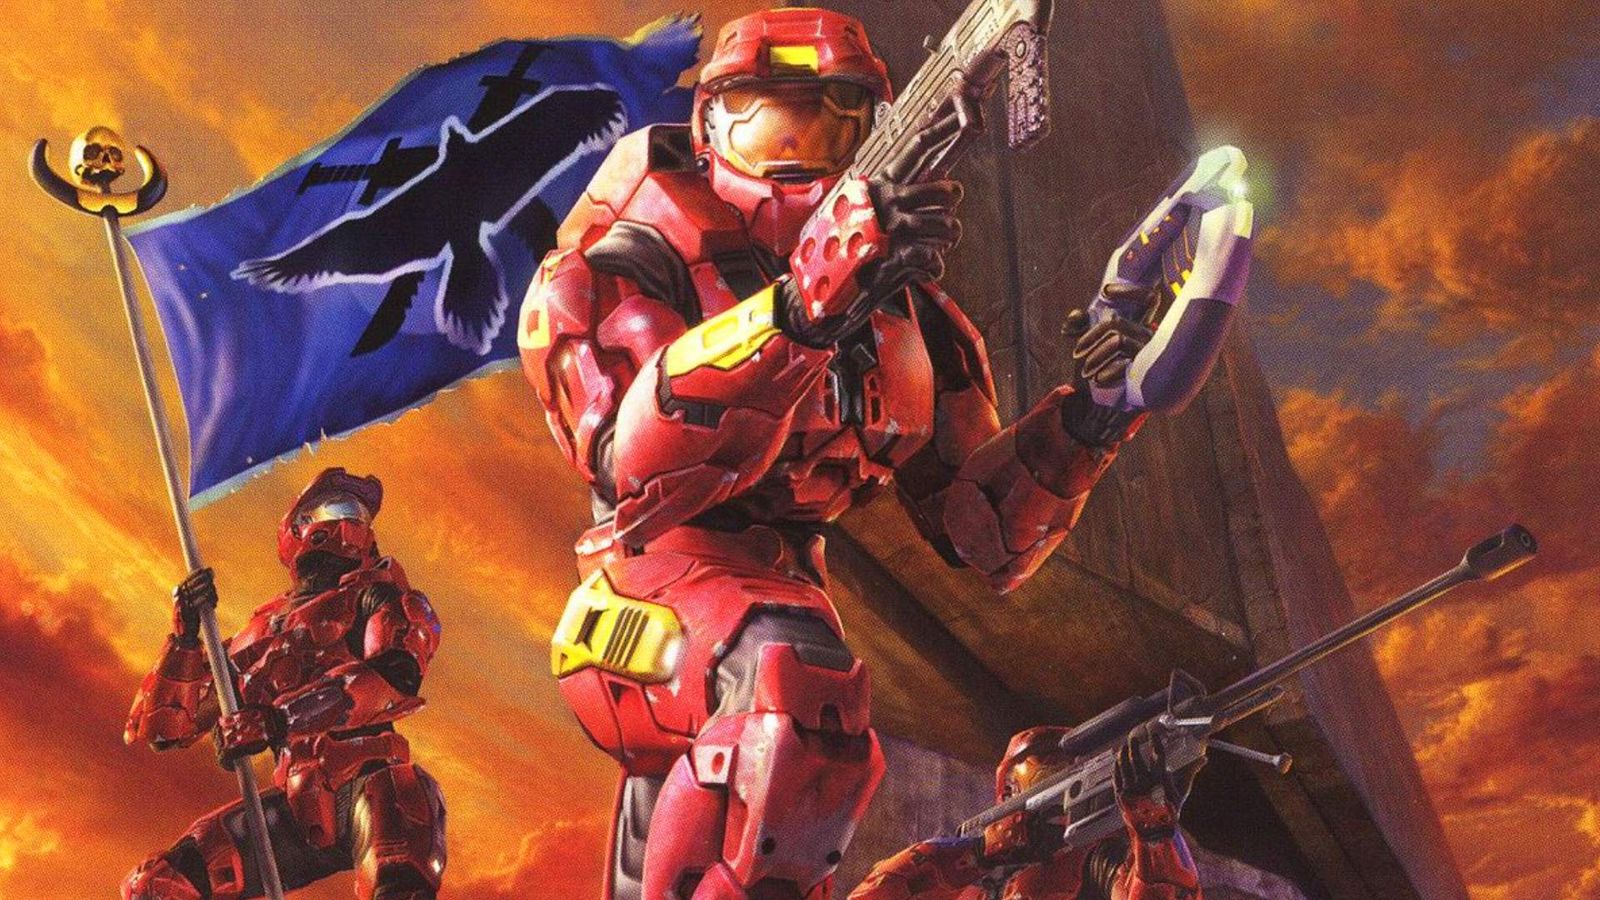 A high quality scan of Halo 2 multiplayer artwork showing three red spartans. The first spartan is posing heroically holding the blue flag, the second is croushing while dual wielding an SMG and plasma pistol, the last is holding a sniper